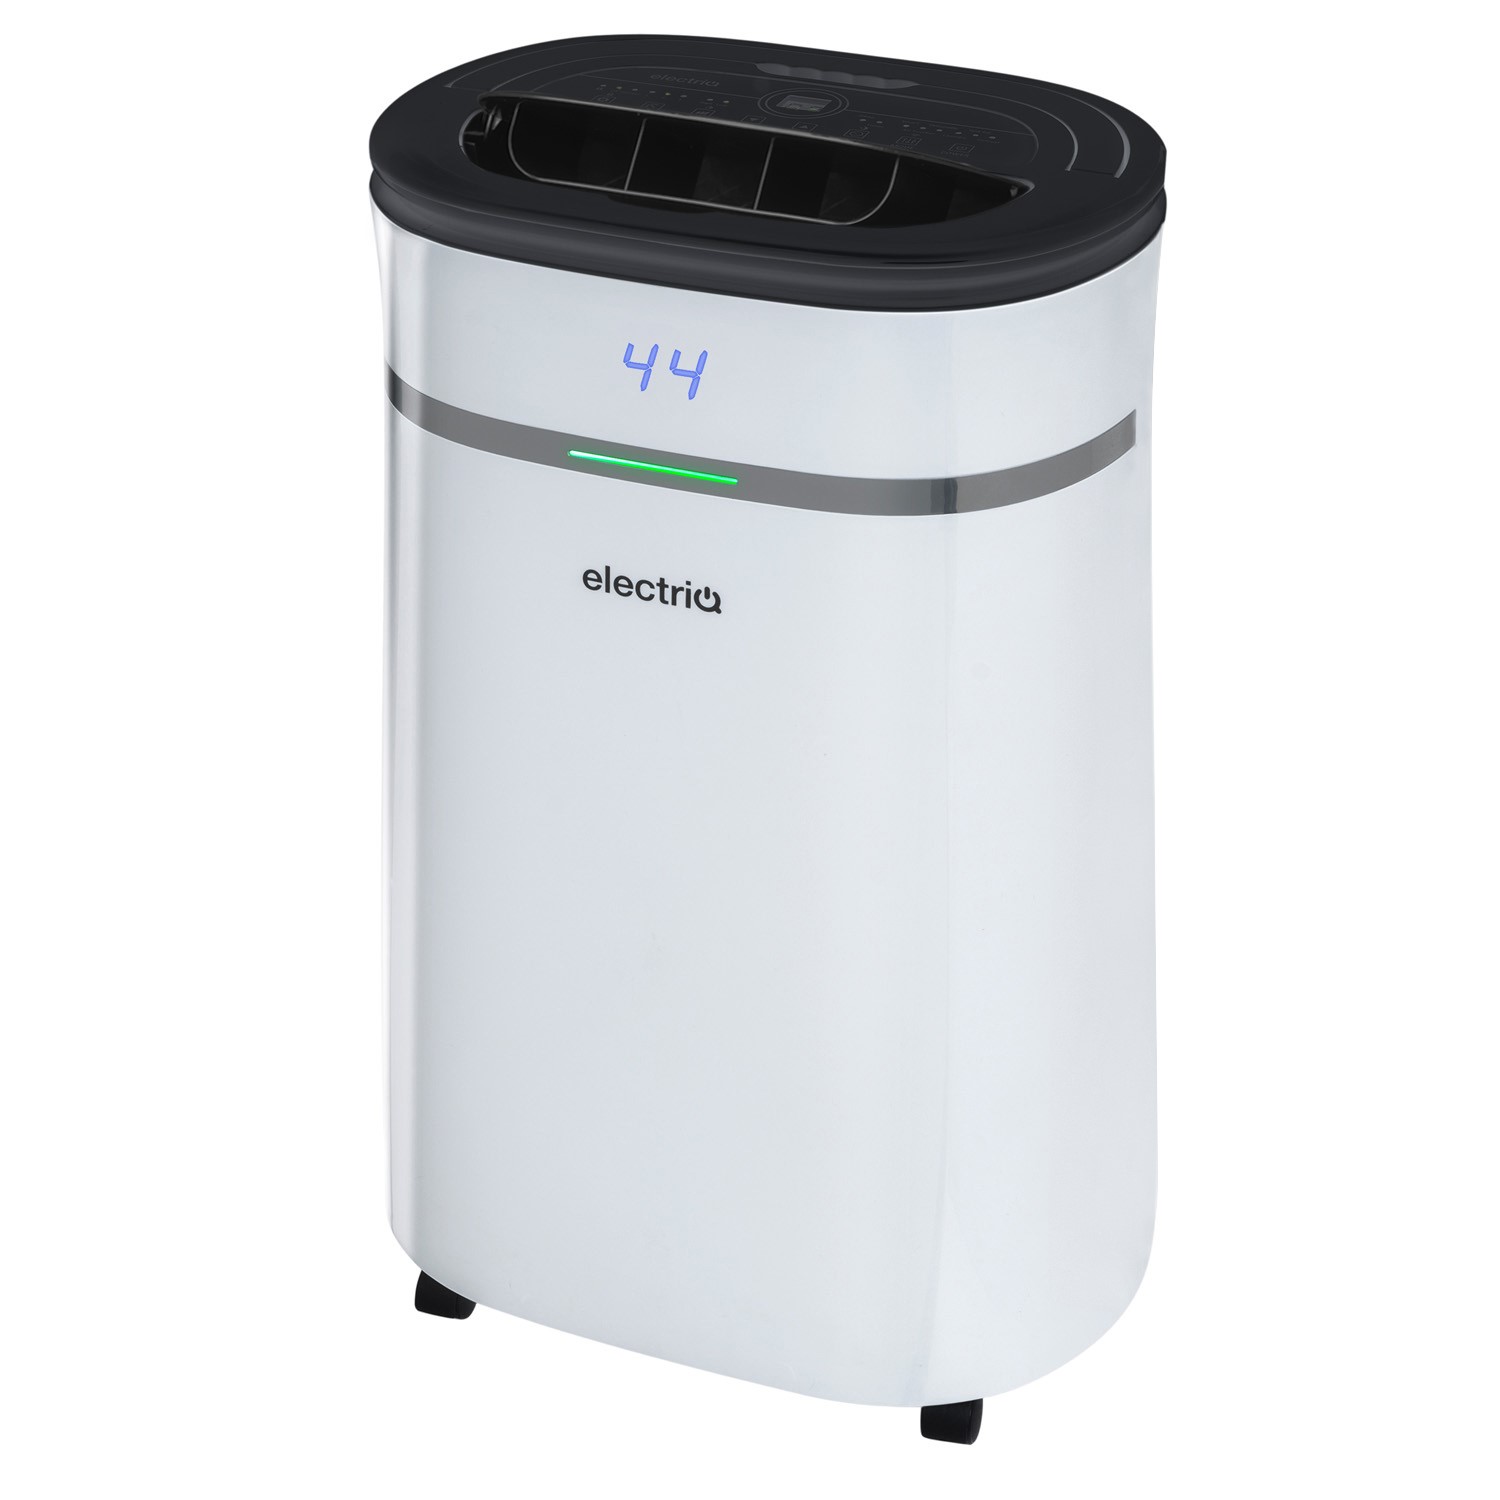 20L Low Energy Dehumidifier - Air purifier for up to 5 bed home